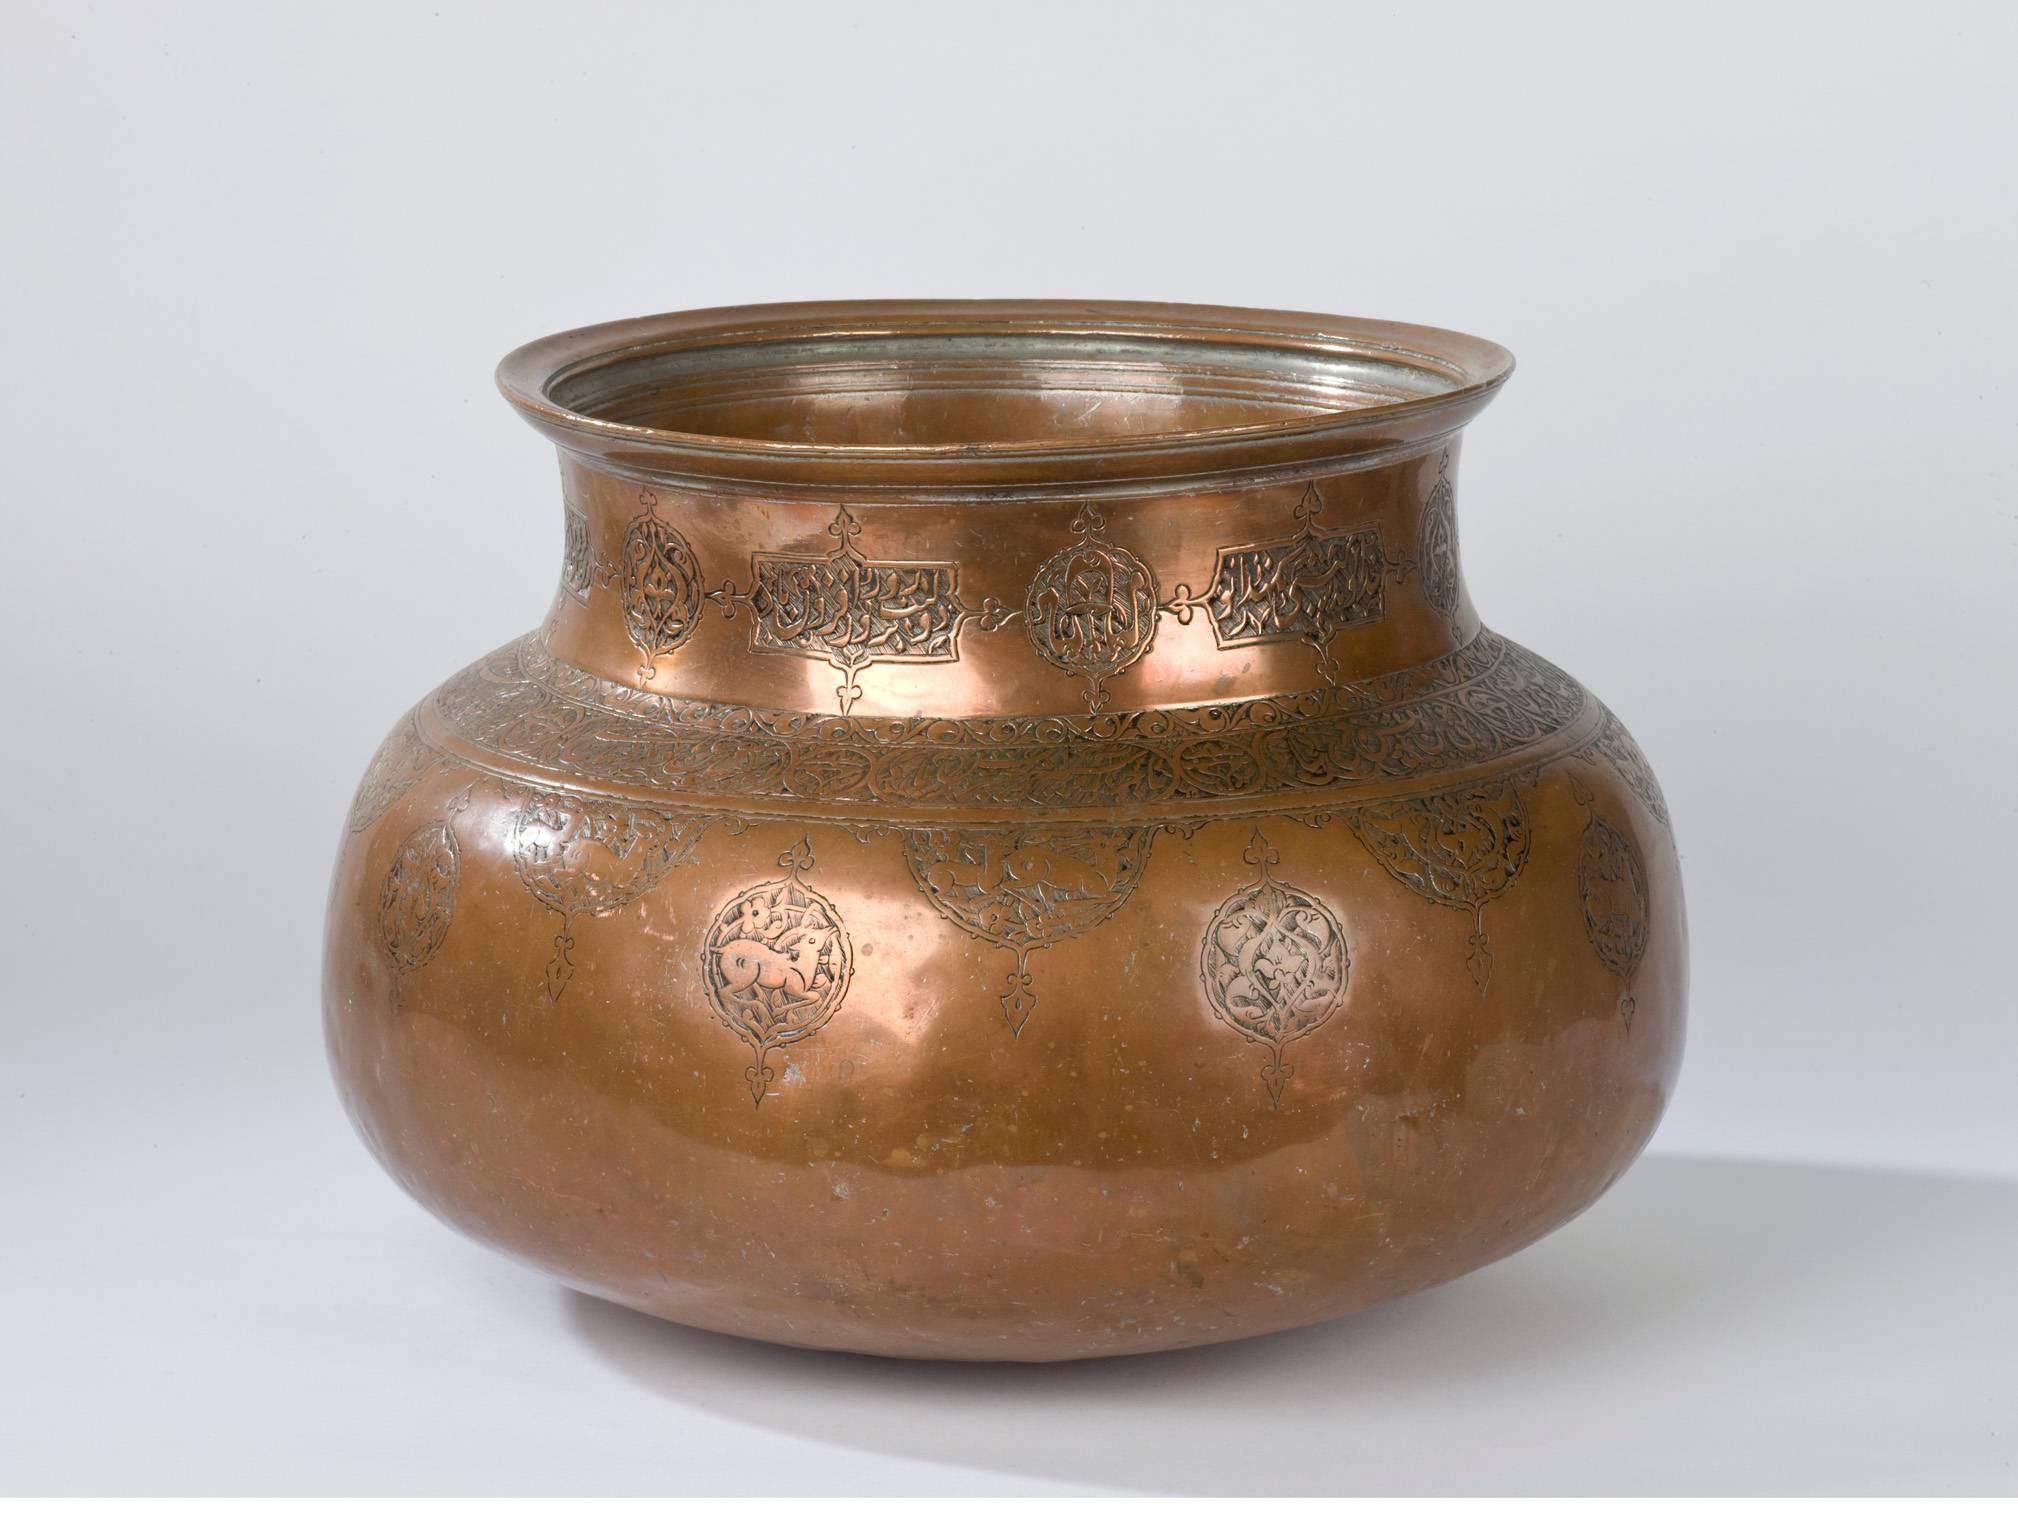 A 17th century Safavid copper basin decorated with calligraphic motifs and cartouches of prancing fauna.